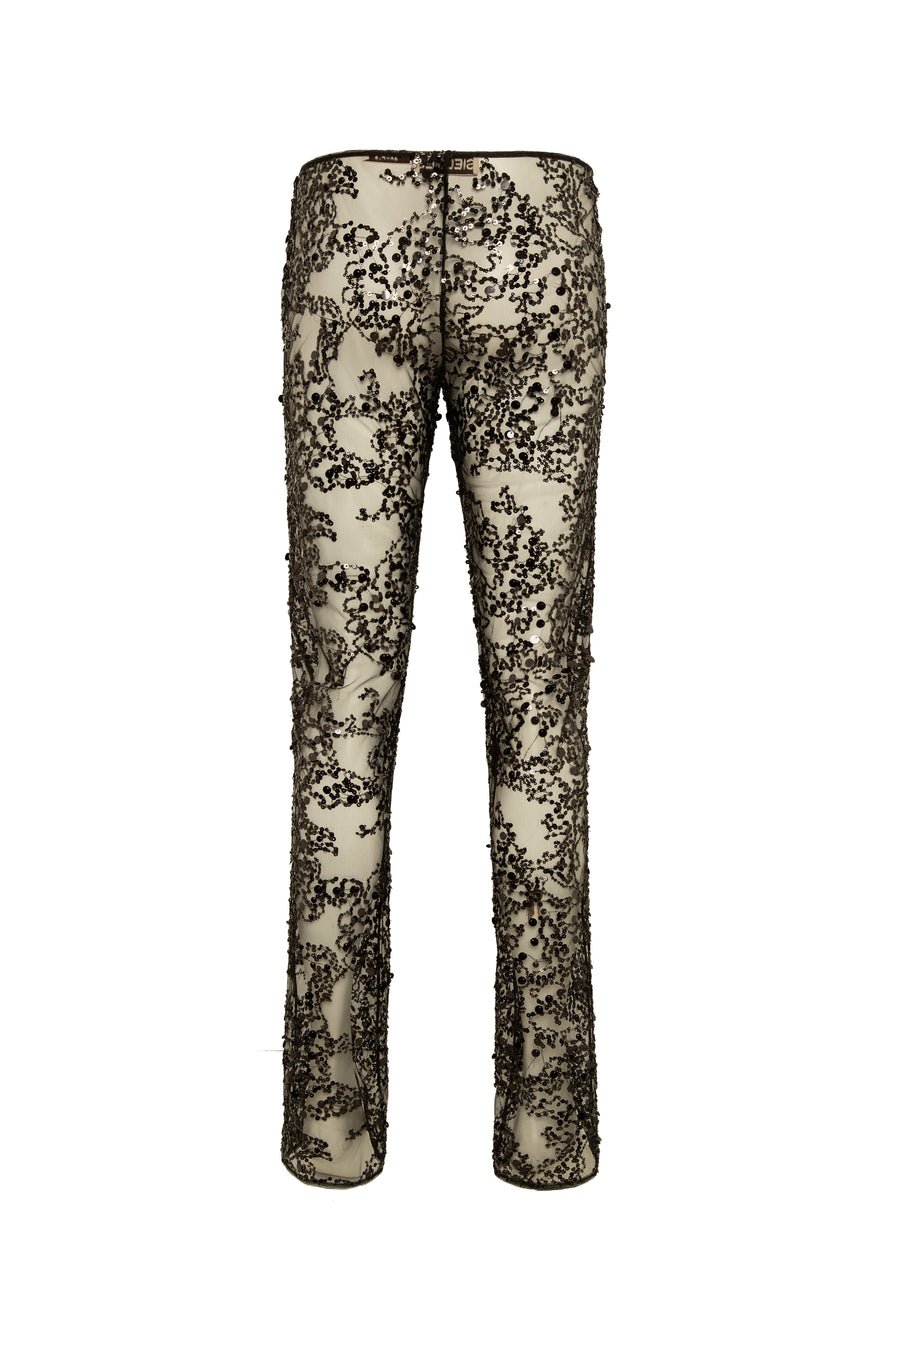 PALS - Sheer sequined pants with front-slit